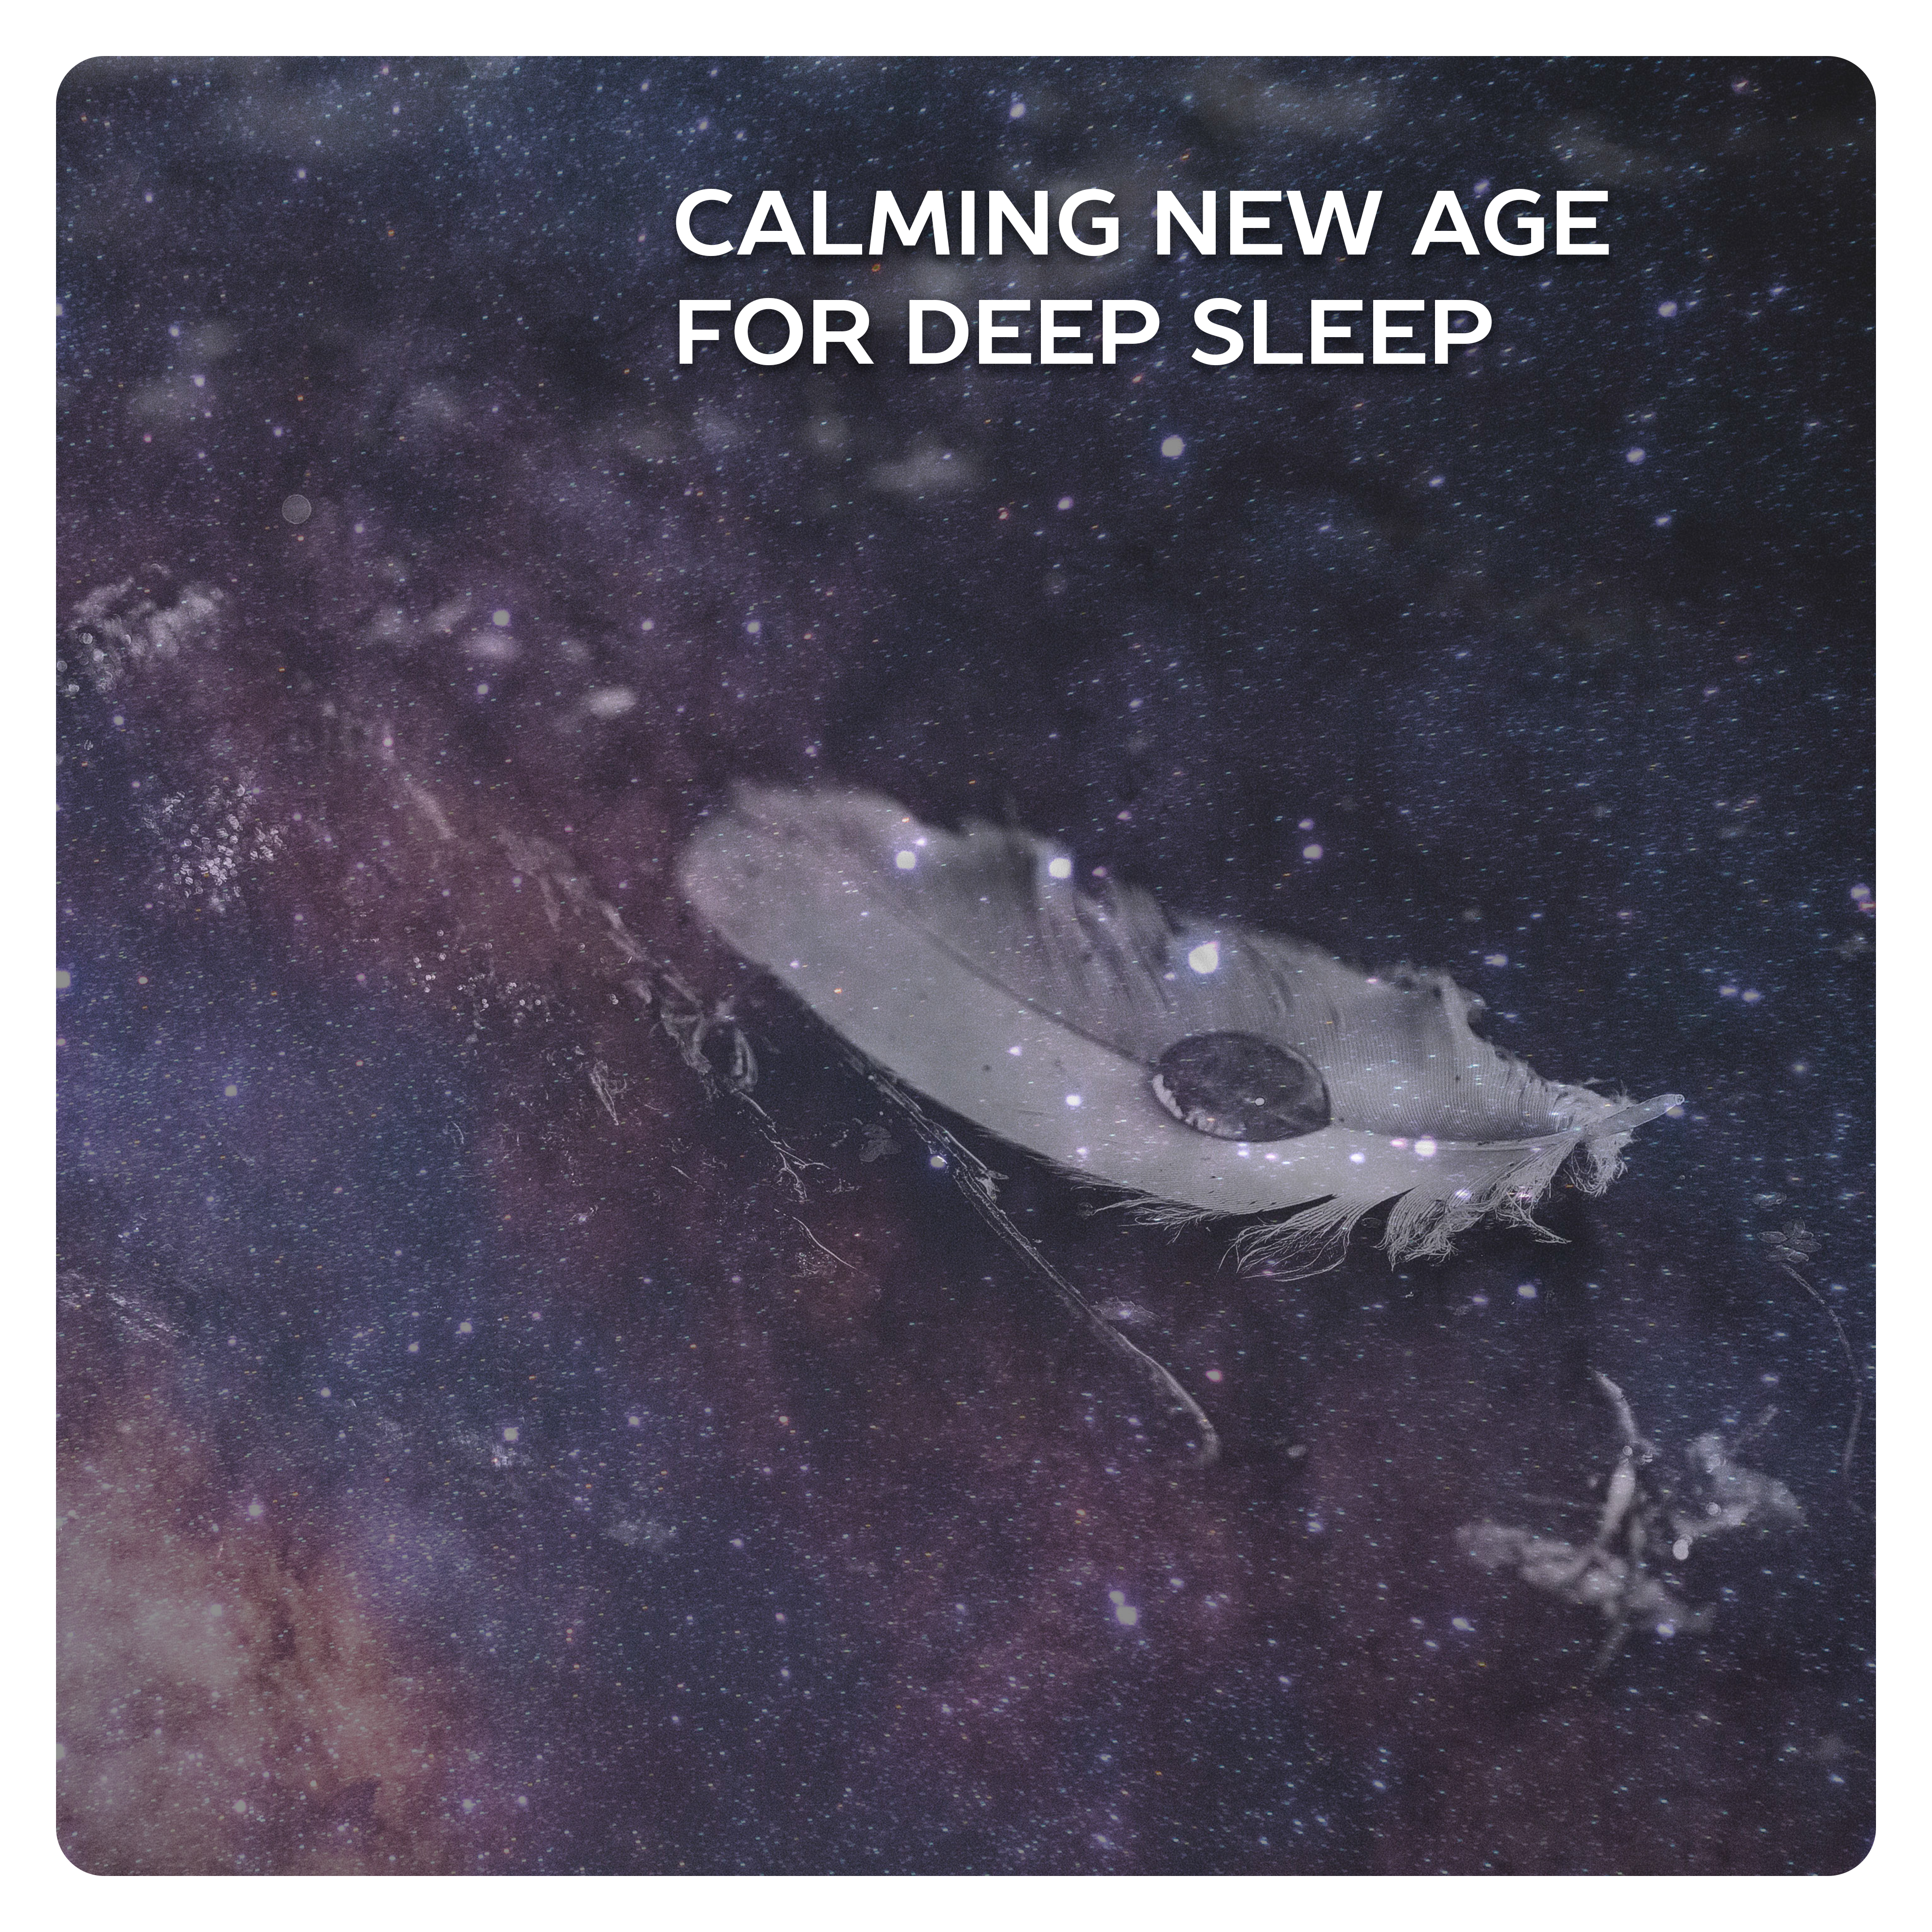 Calming New Age for Deep Sleep – Relaxing Sounds, Long Dreaming, Soft Sounds to Sleep, Music to Rest & Relax